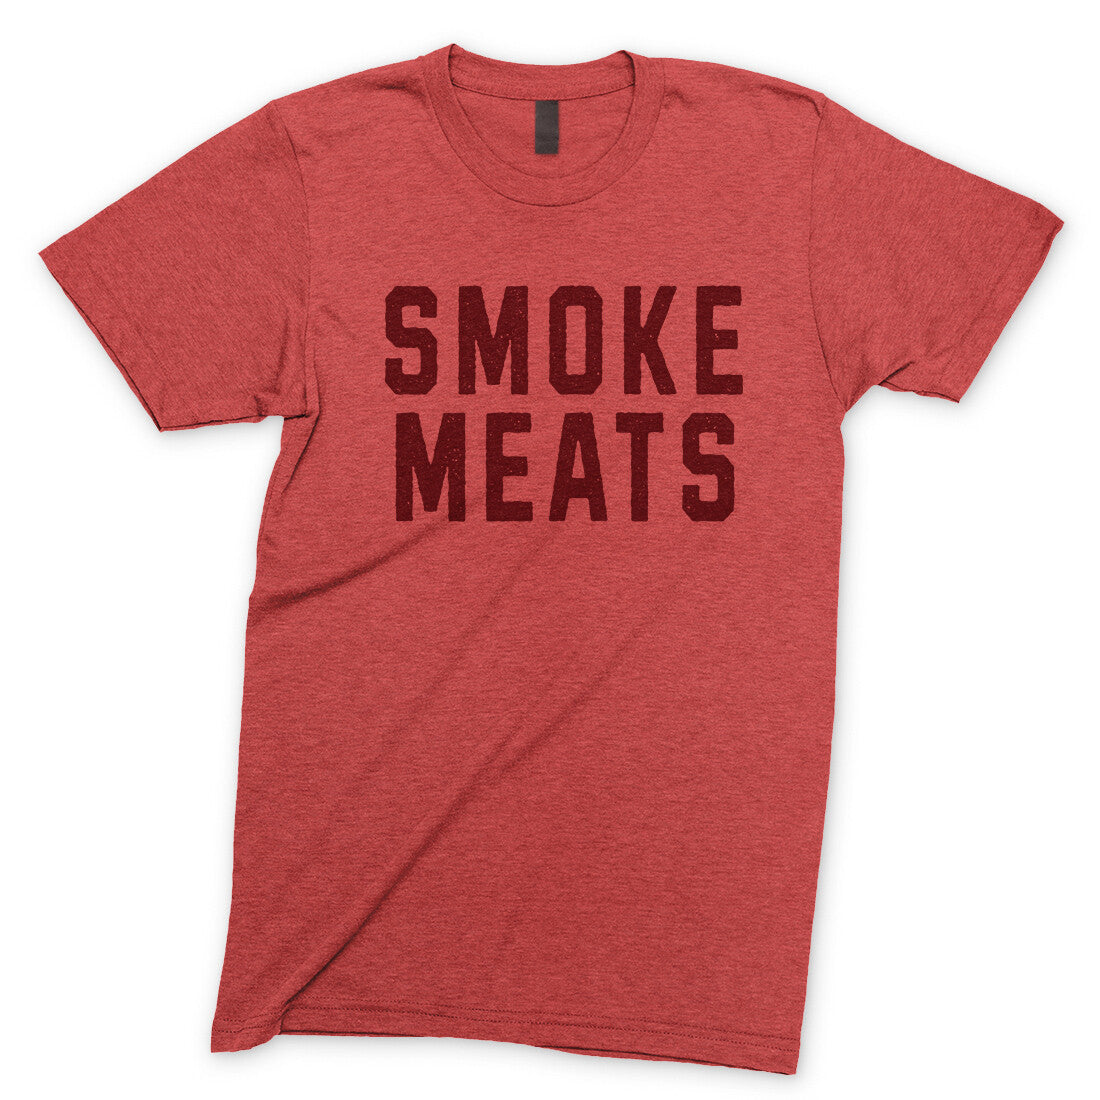 Smoke Meats in Heather Red Color